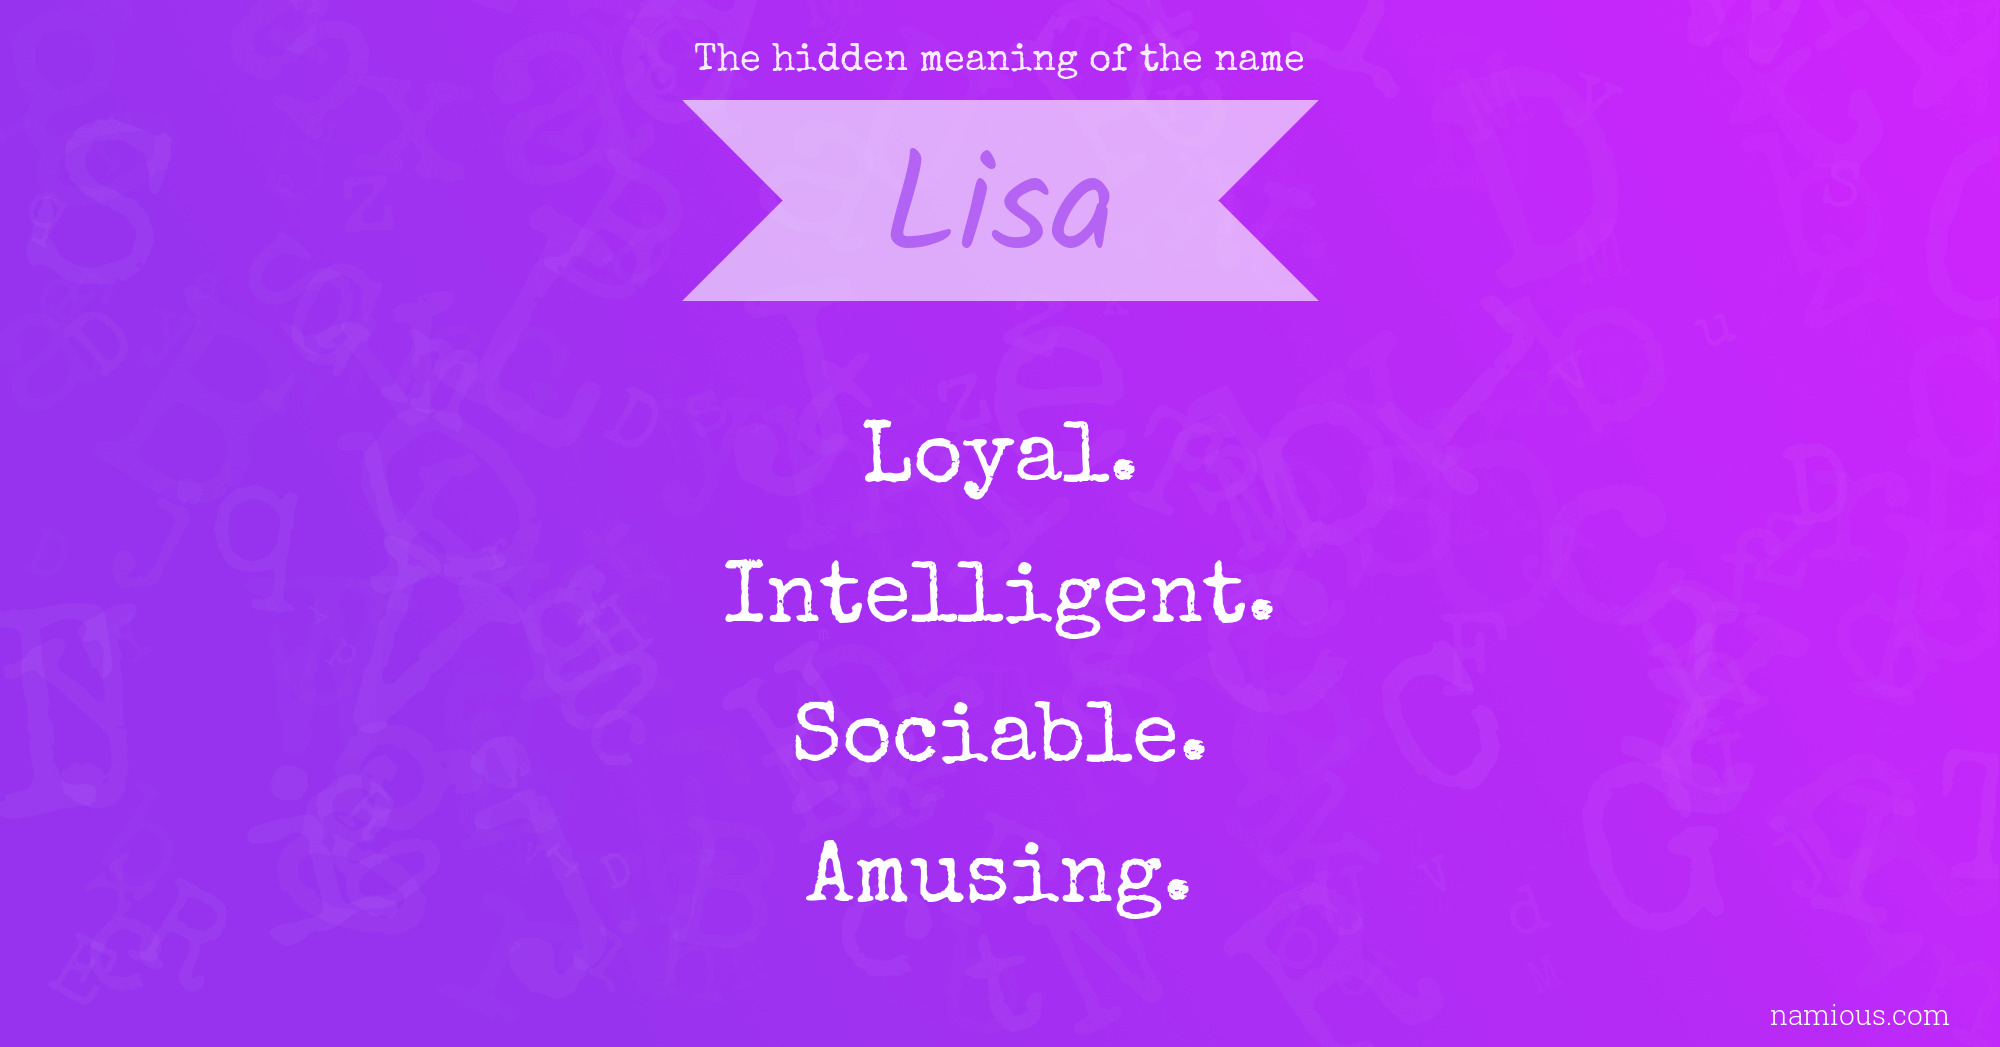 The hidden meaning of the name Lisa